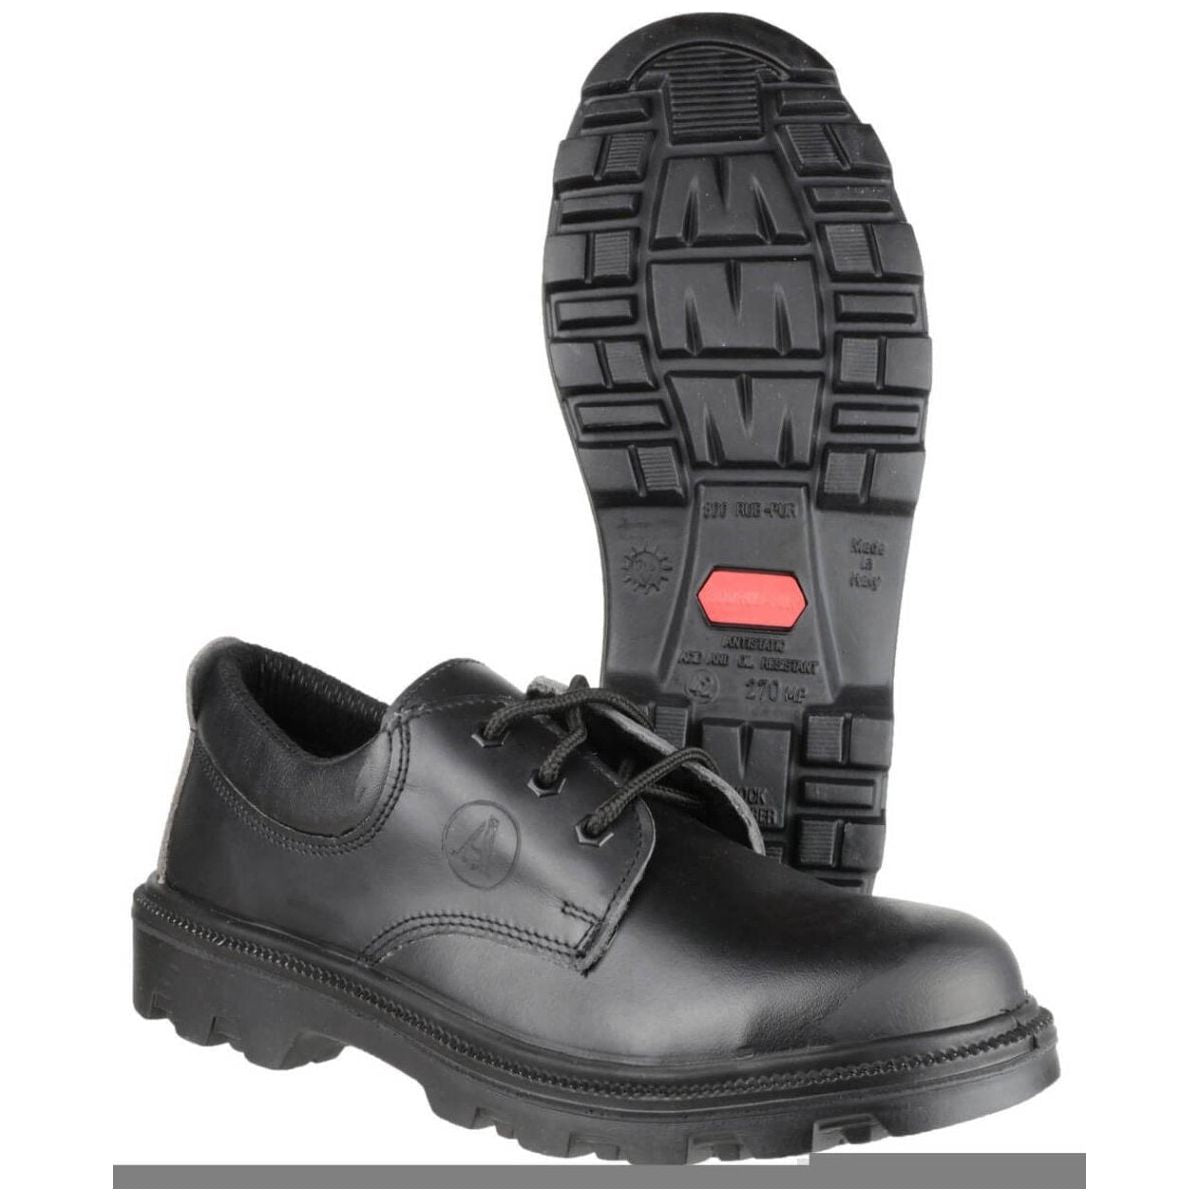 Amblers Fs133 Safety Shoes Mens - workweargurus.com